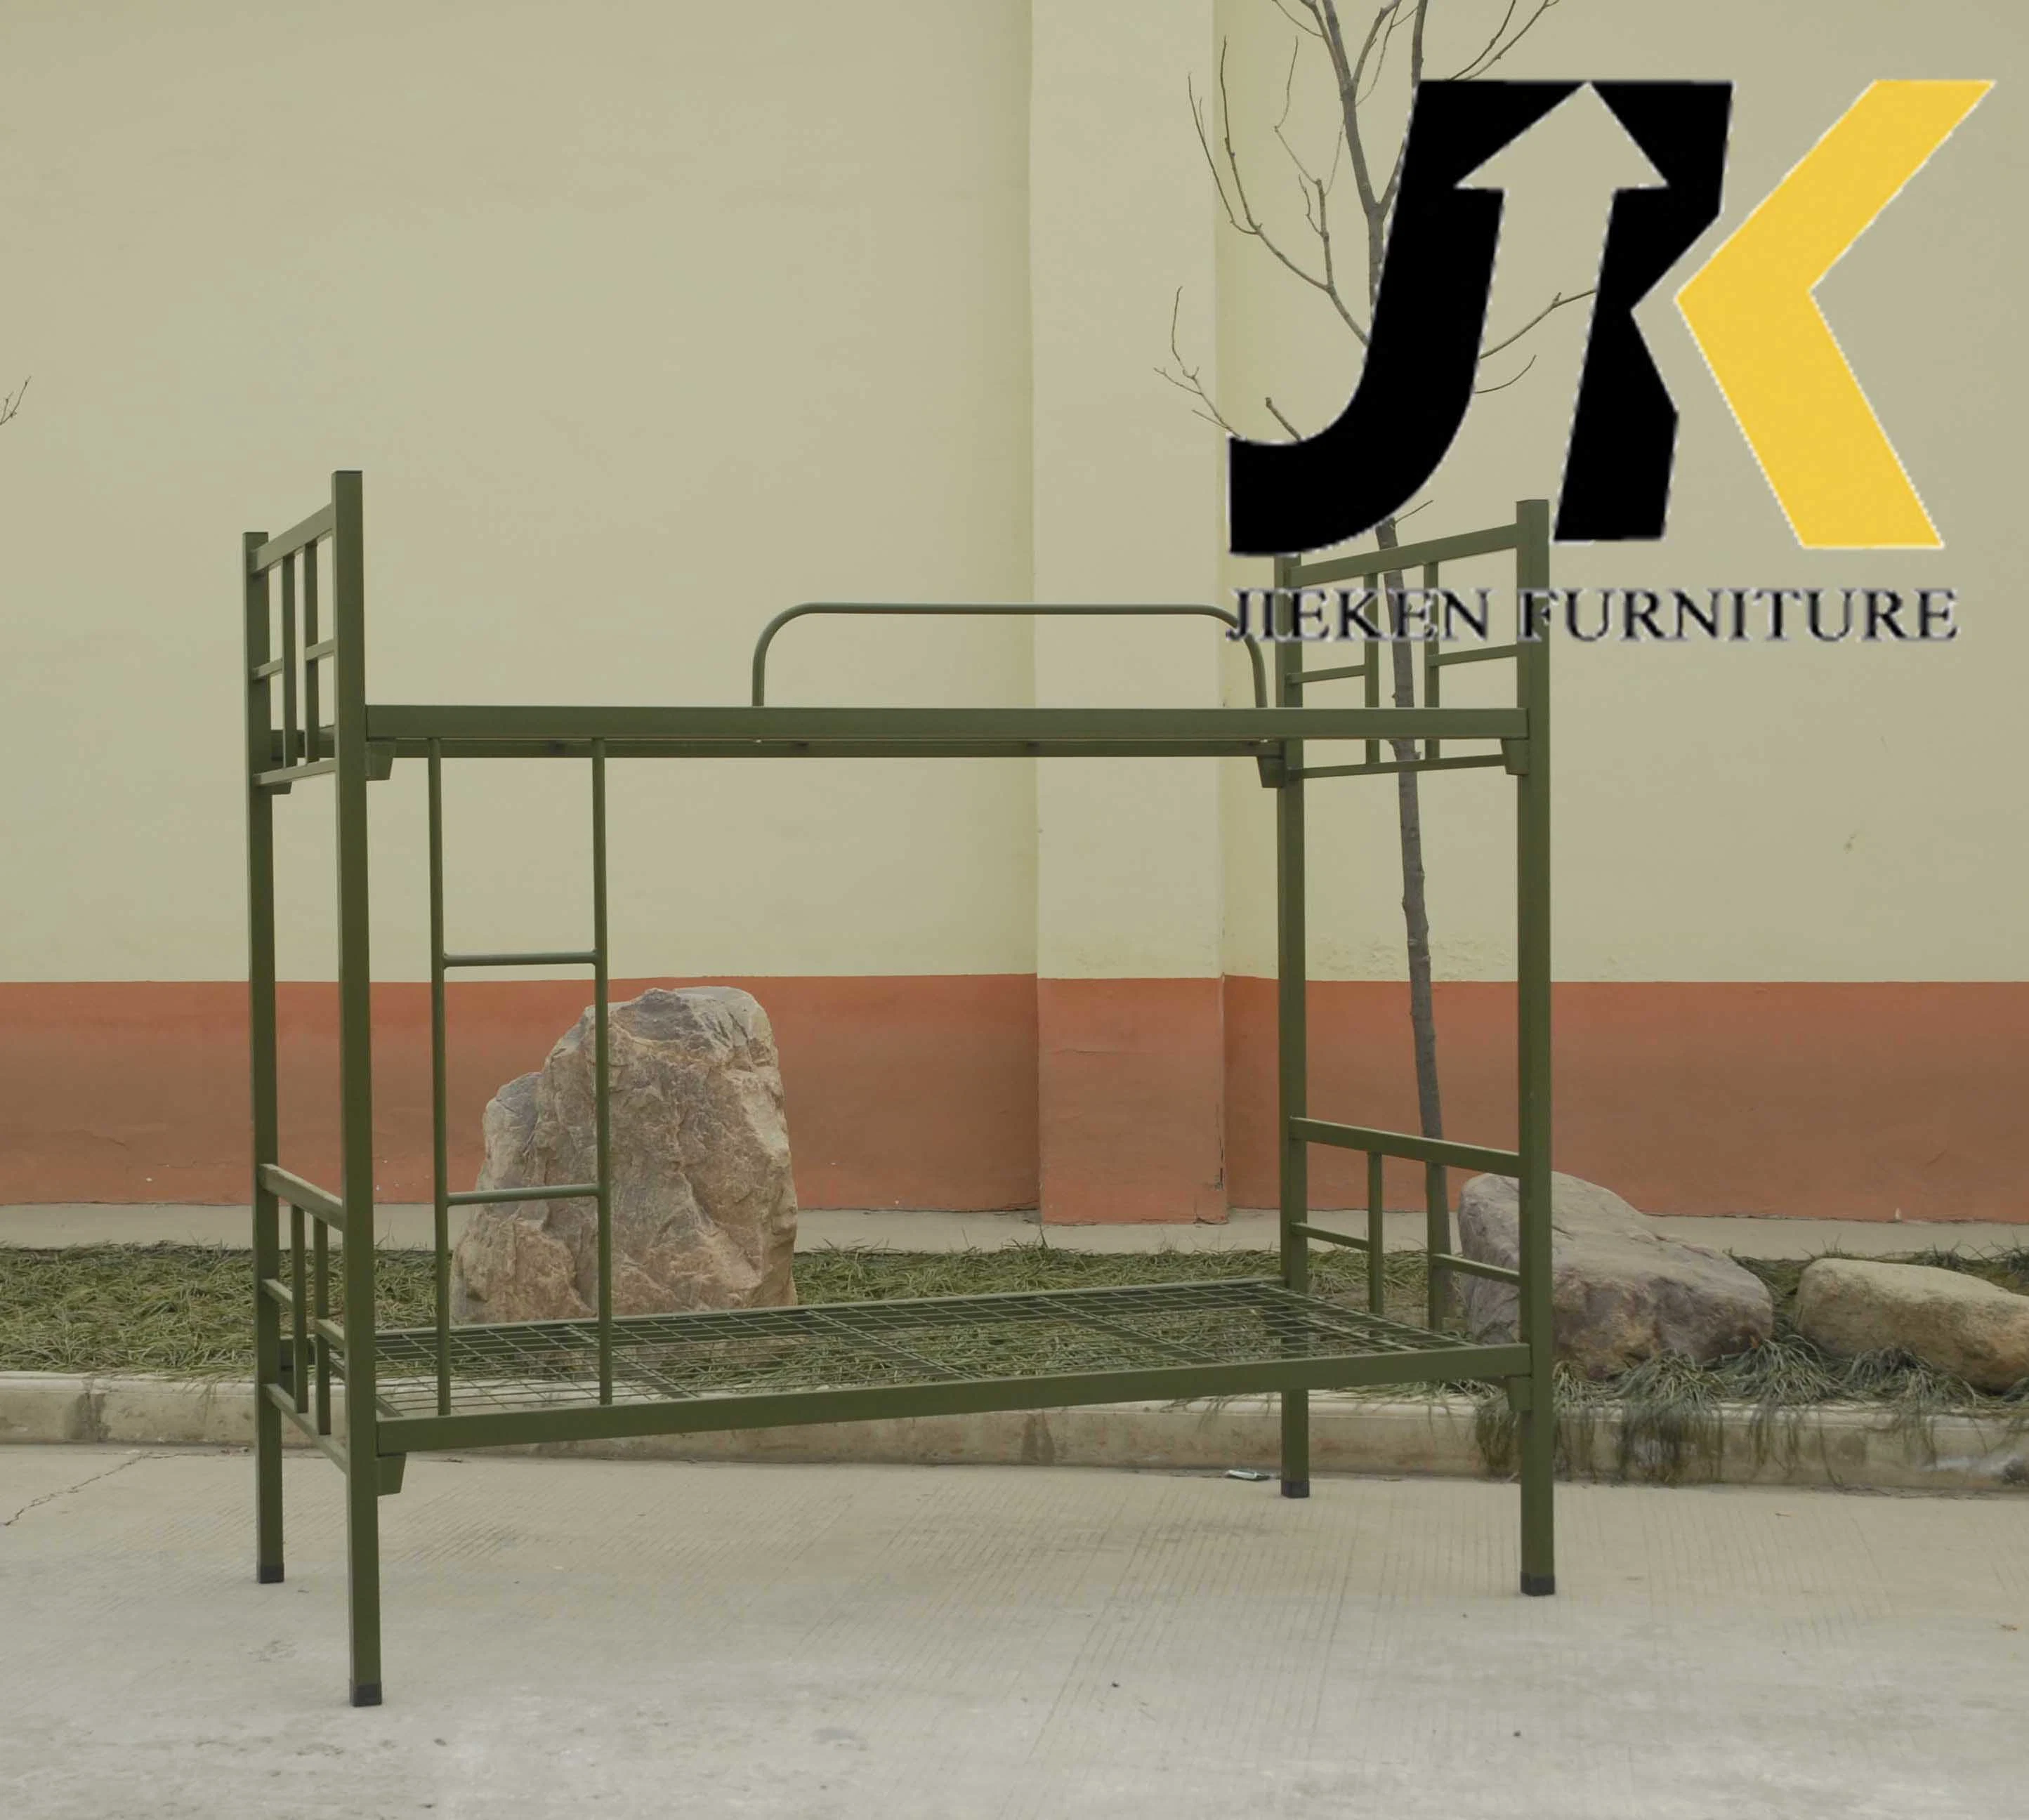 Army Style Equipment Tent Military Style Metal Bunk Bed Olive Green Steel Bunk Bed to Angola (beliches metallico/lits superposes metalliques)